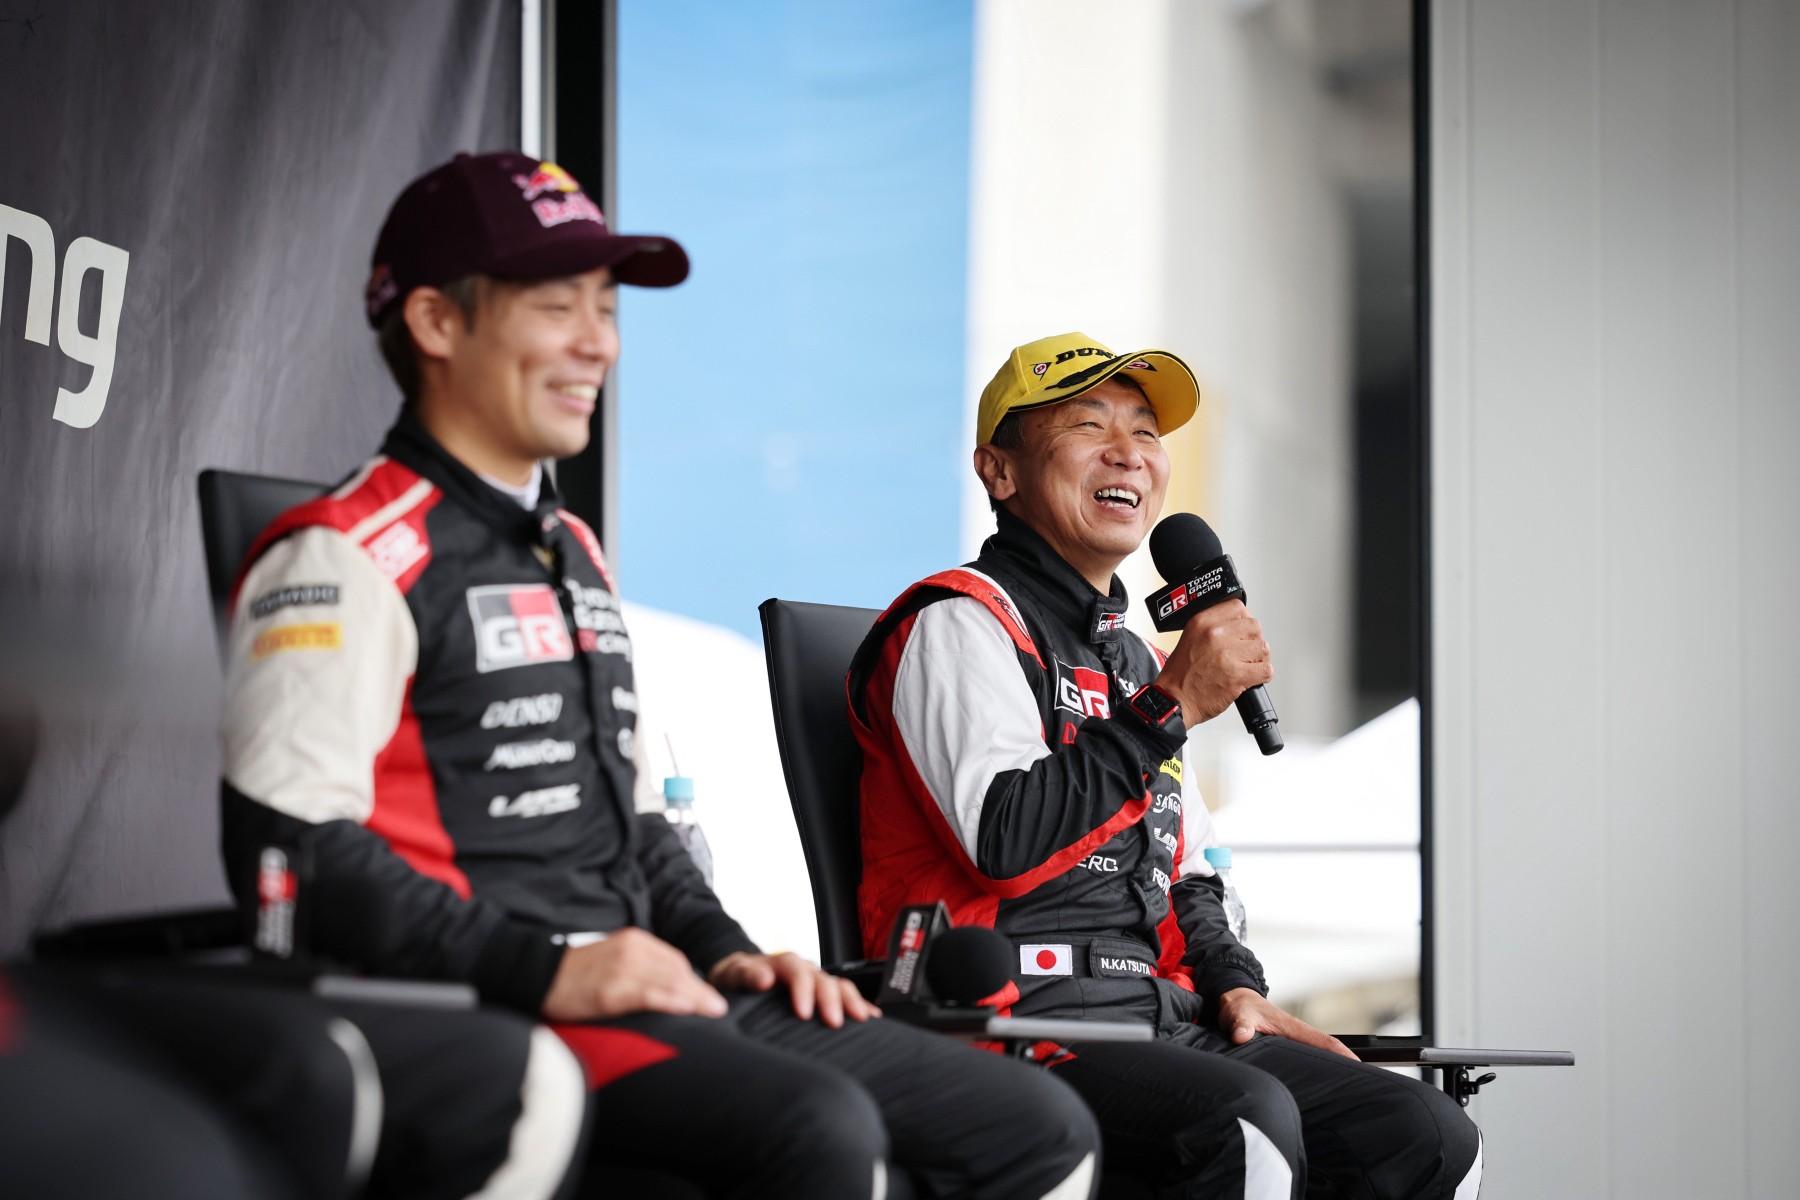 Morizo Can't Stop Leaking News at WRC Talk Event